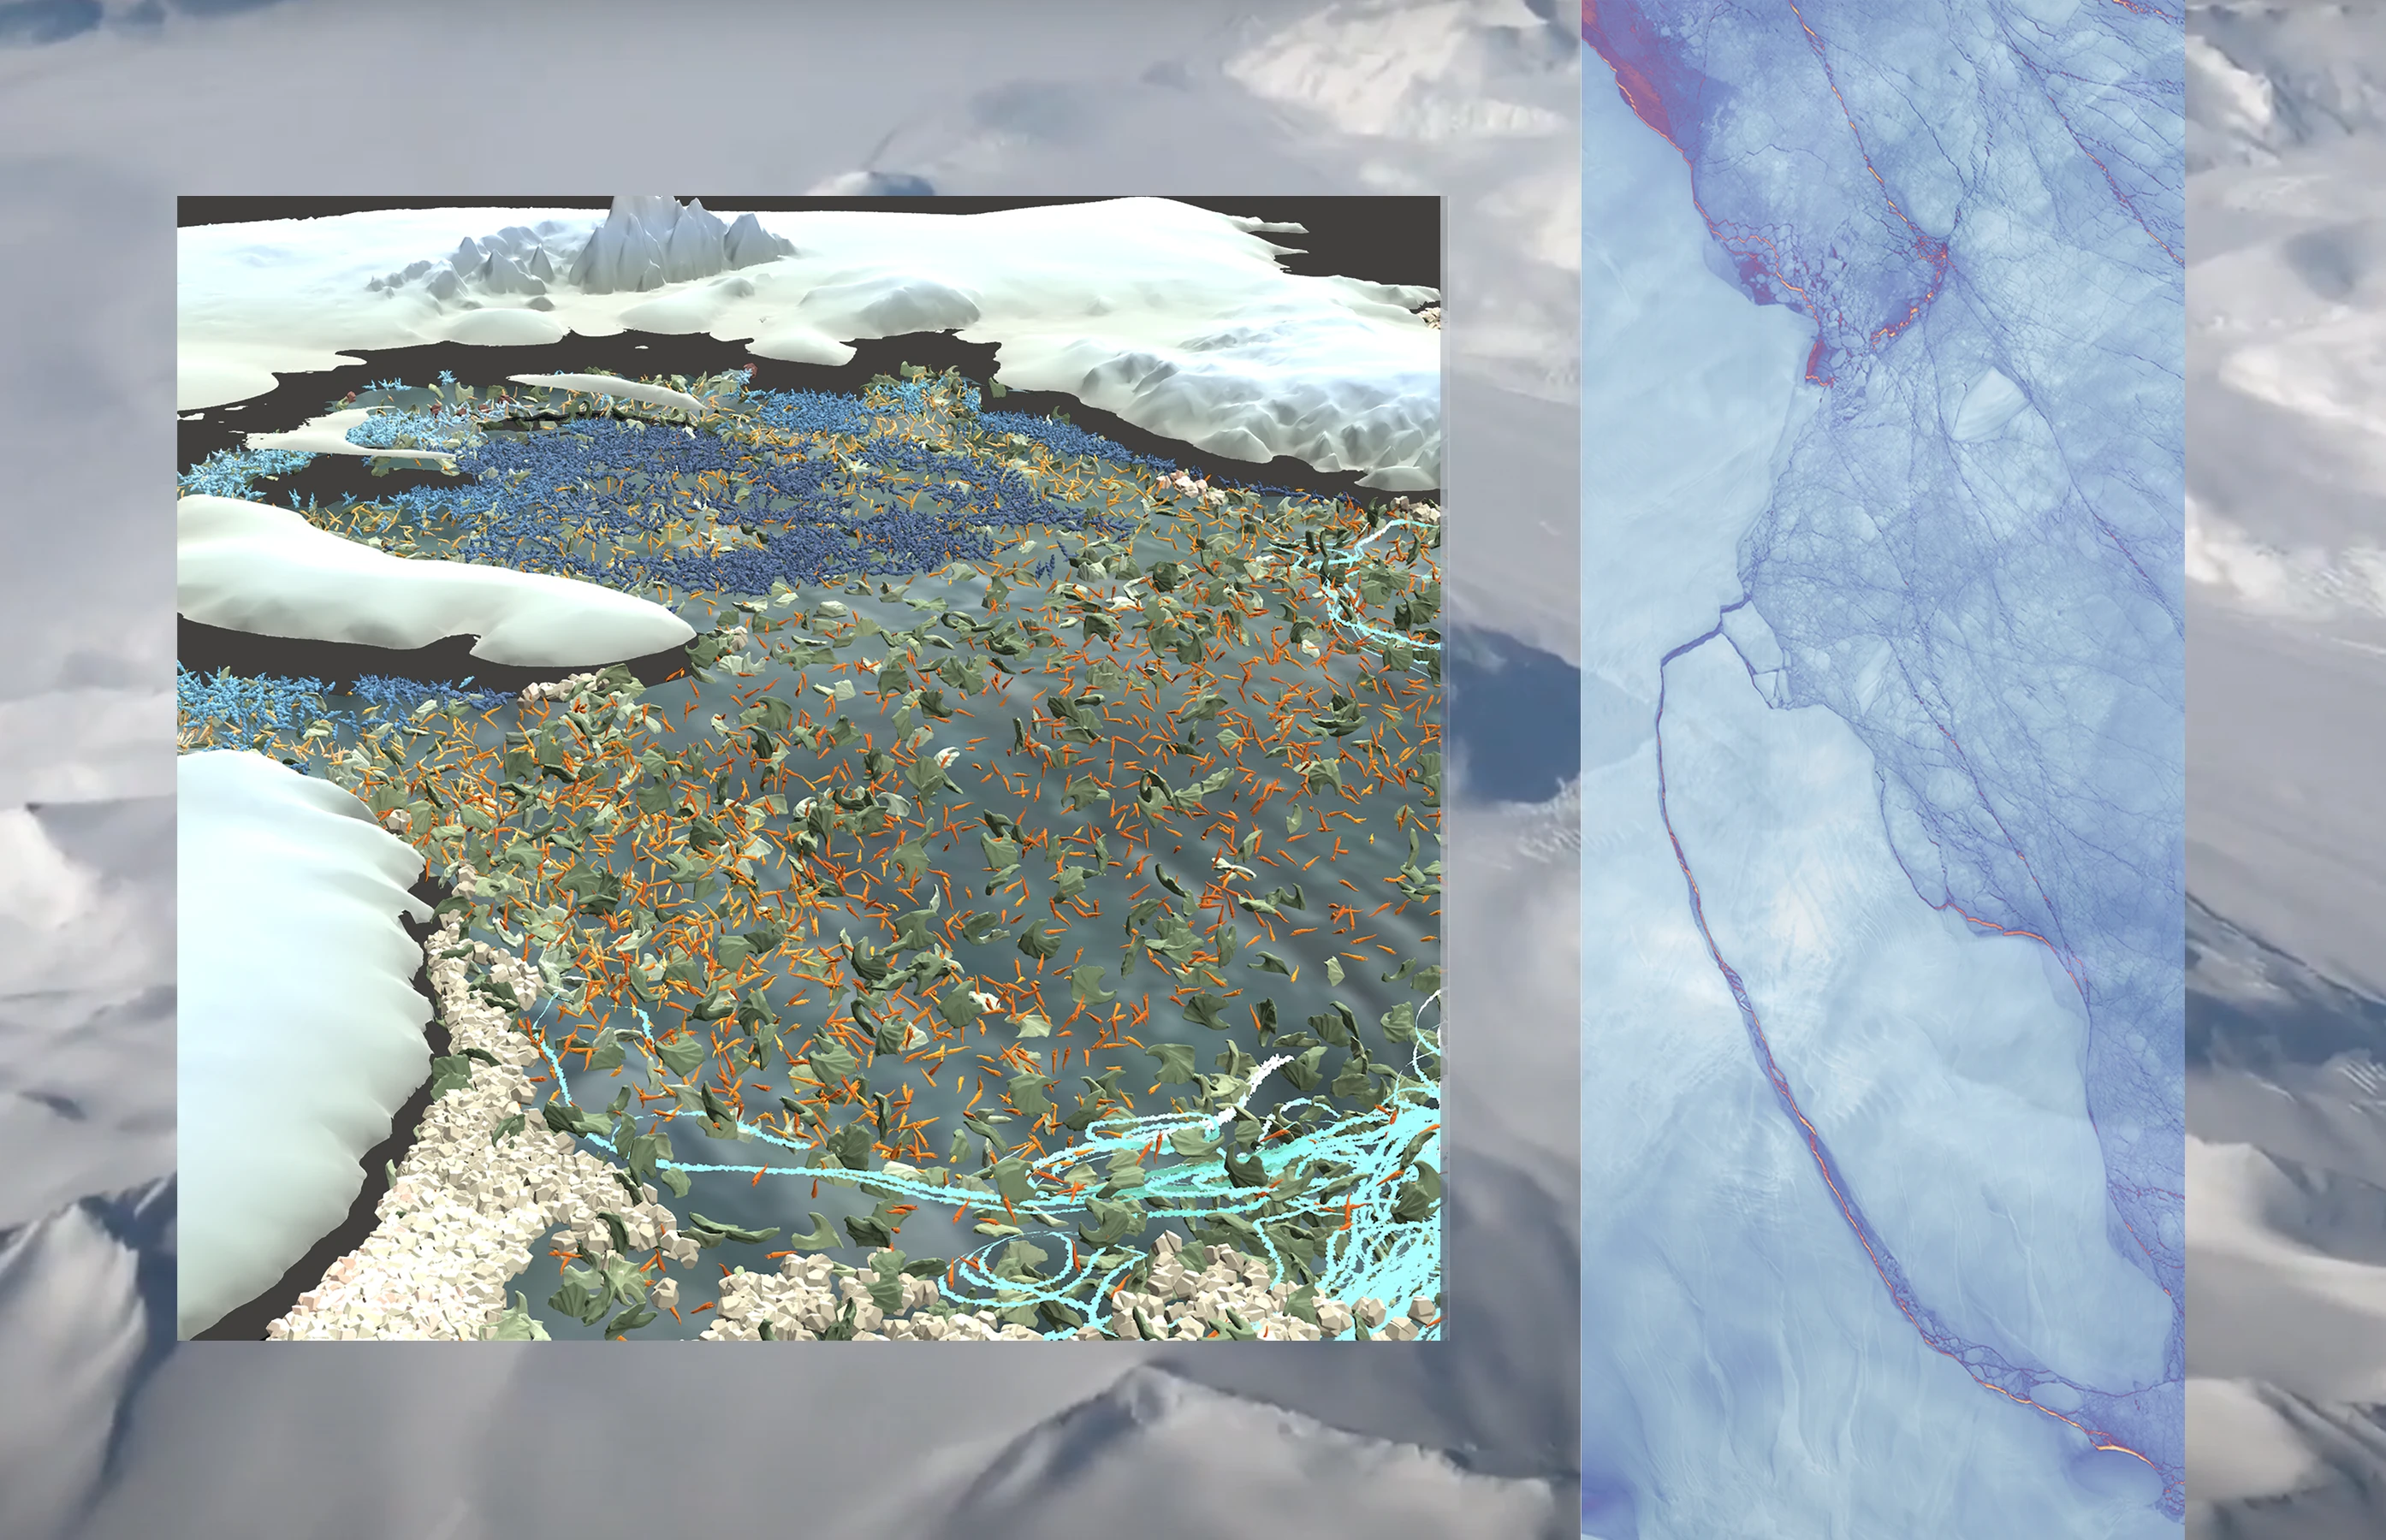 Collages on the waters under the Antarctic Ice Shelves, containing data and contextual imagery  on the fragility of these environments.